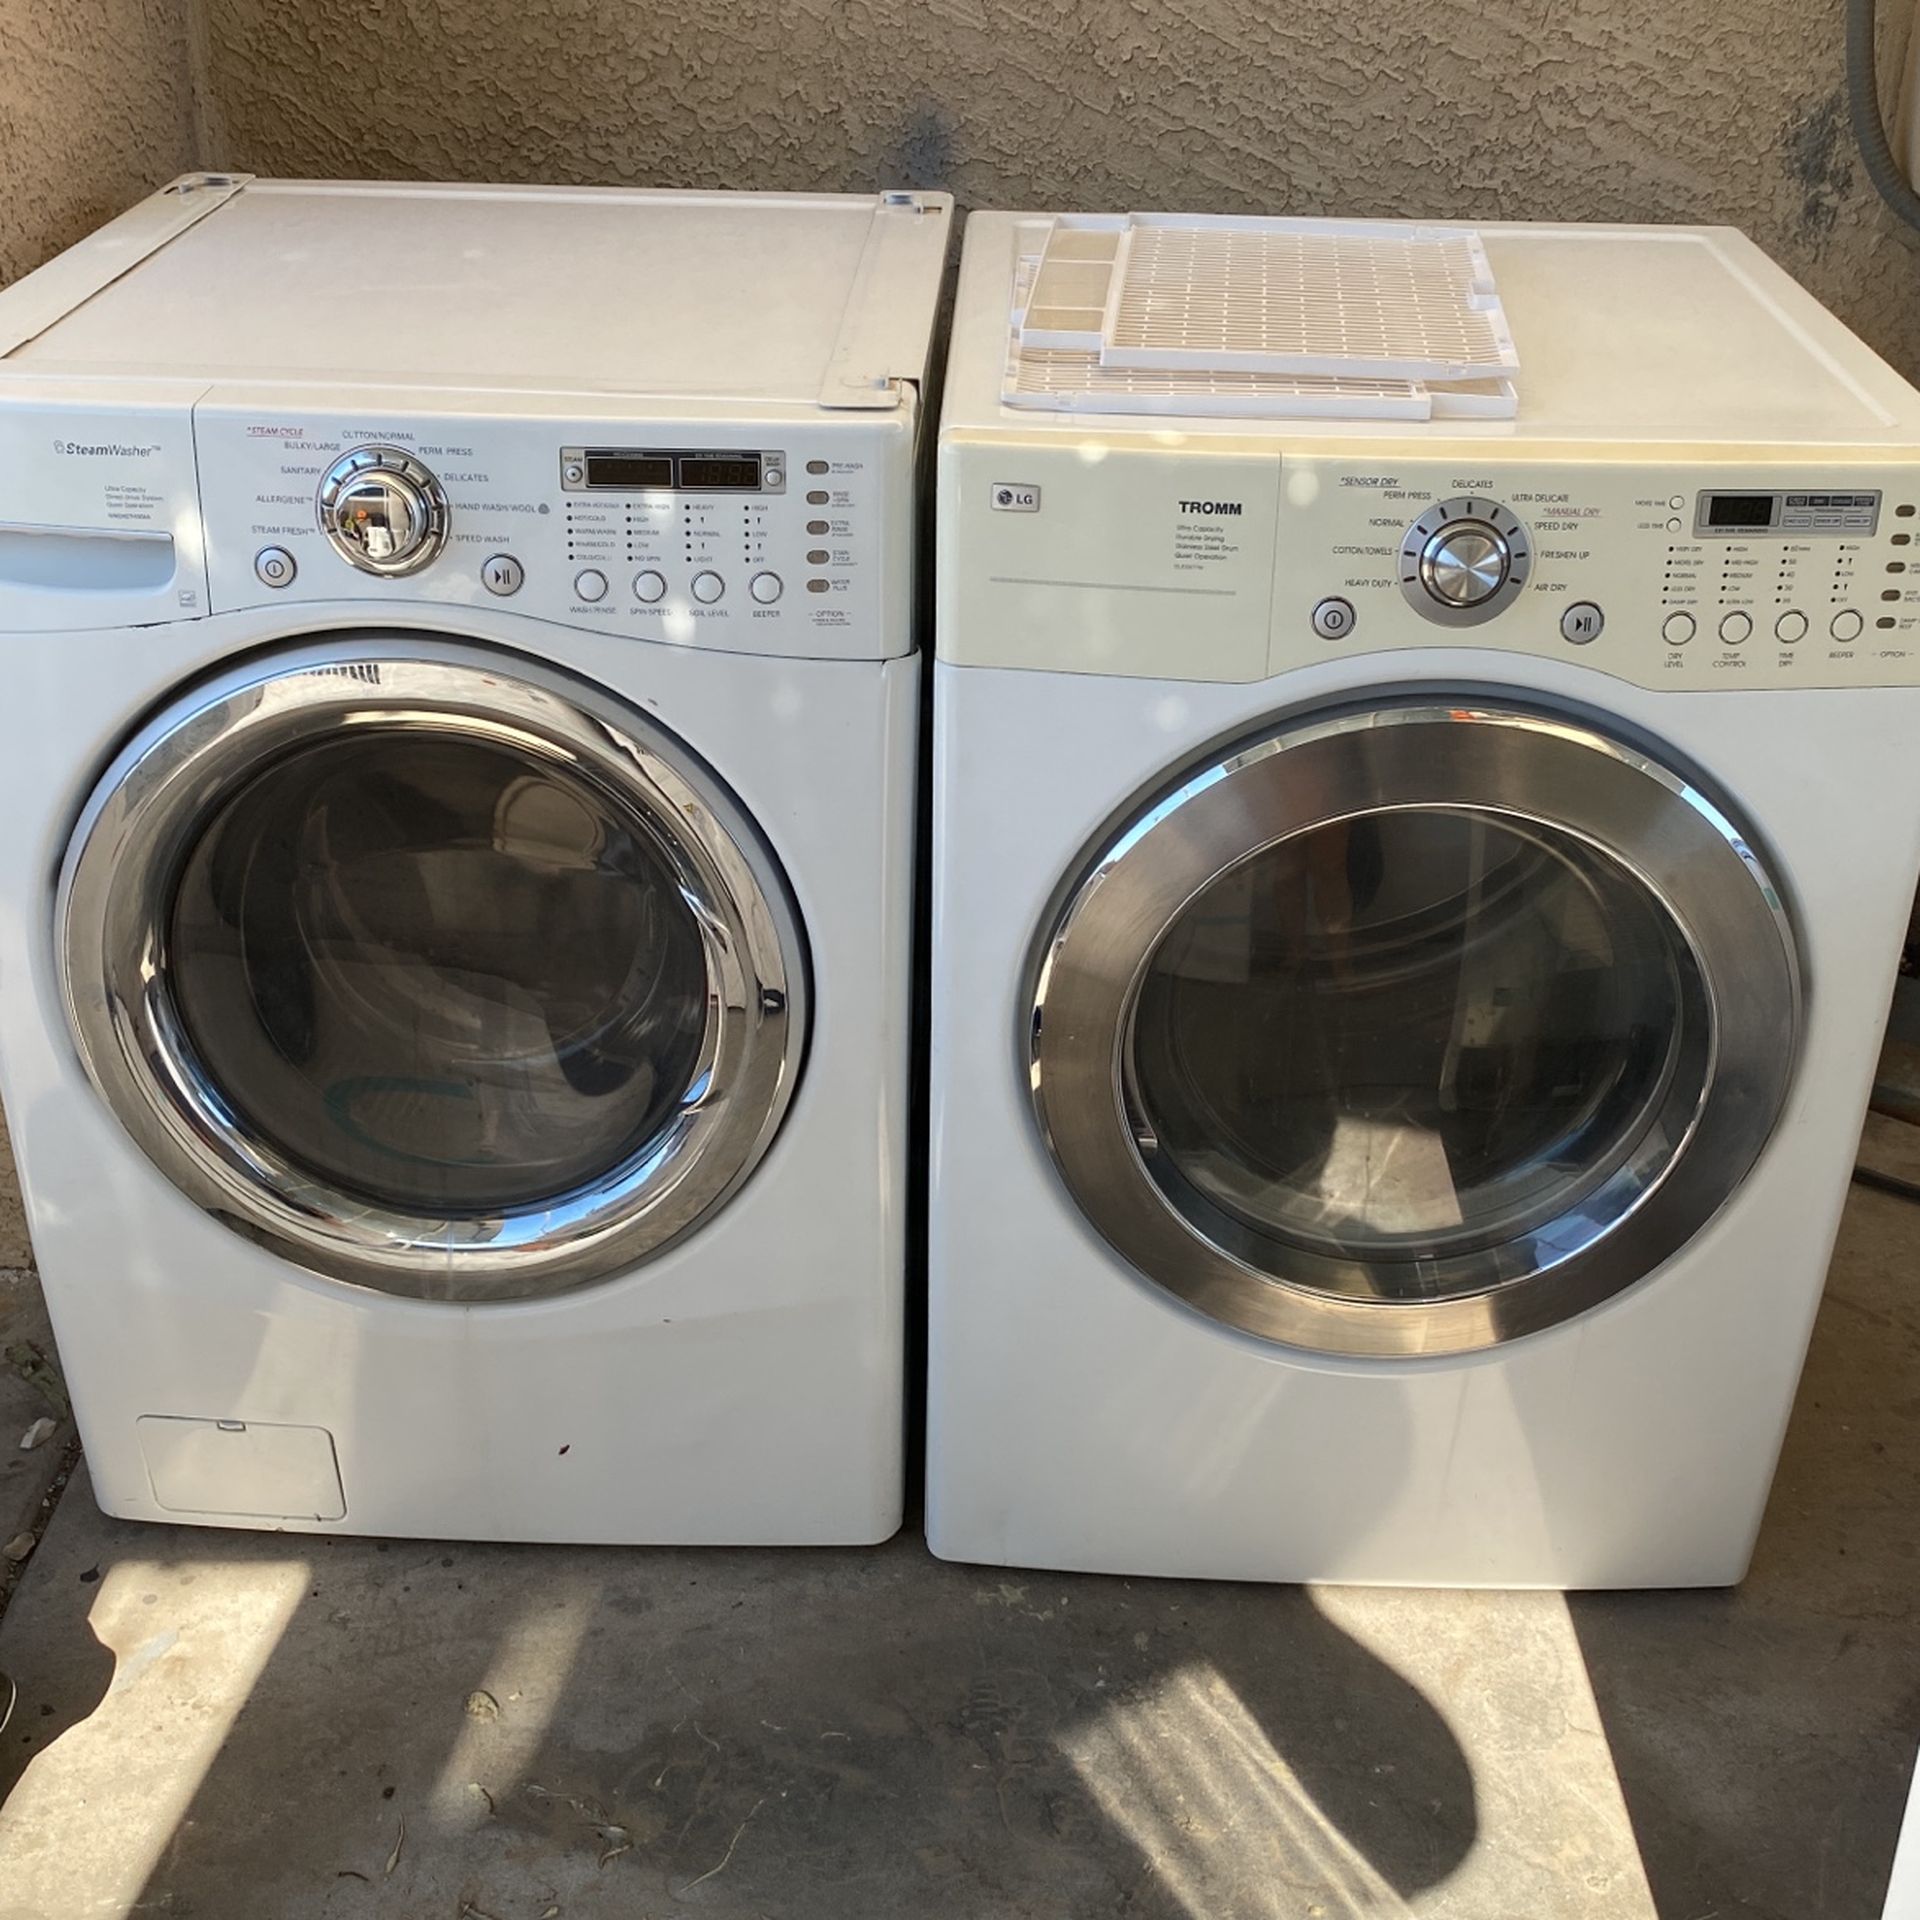 LG front load washer and dryer